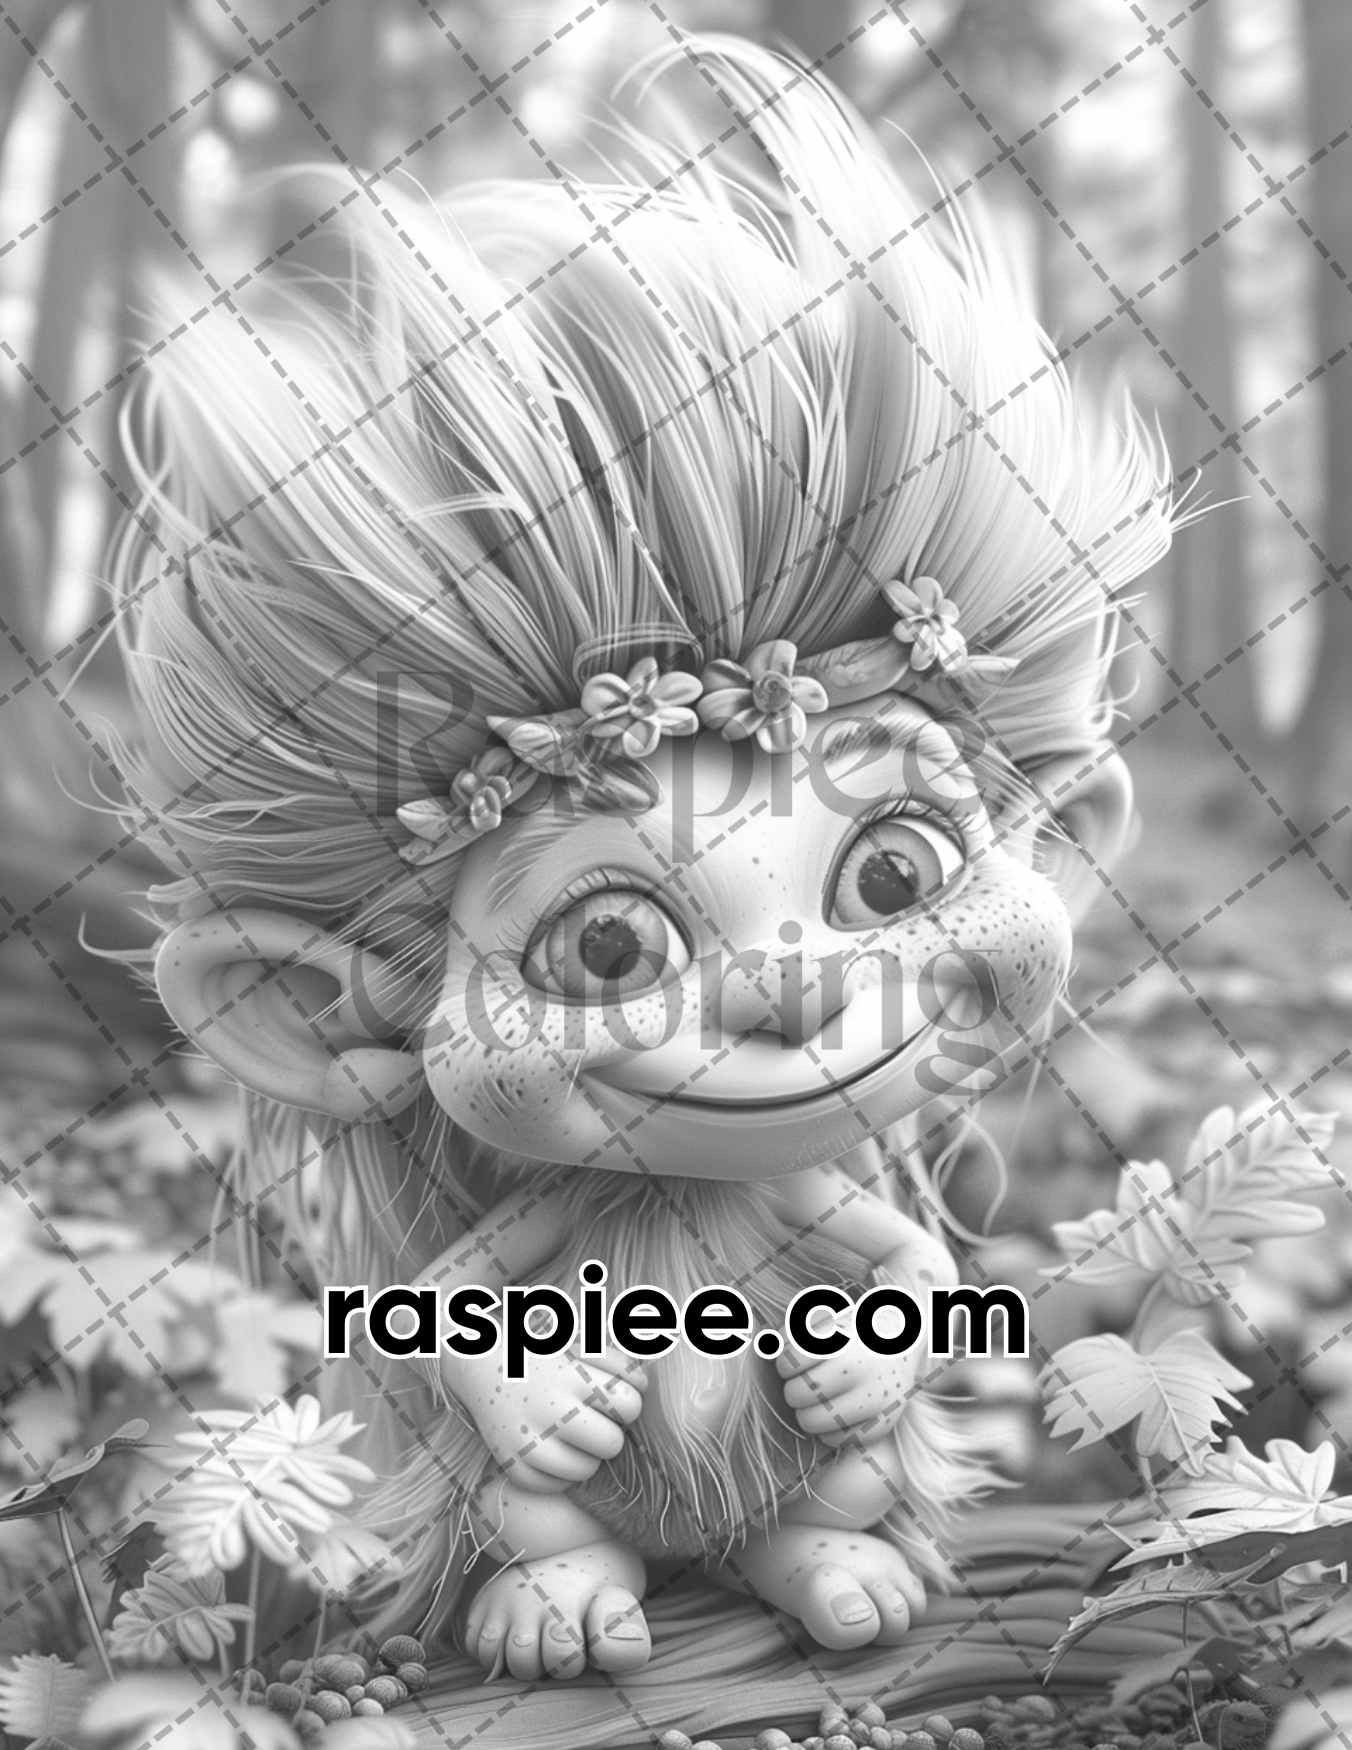 adult coloring pages, adult coloring sheets, adult coloring book pdf, adult coloring book printable, grayscale coloring pages, grayscale coloring books, grayscale illustration, Fantasy Little Trolls Grayscale Adult Coloring Pages